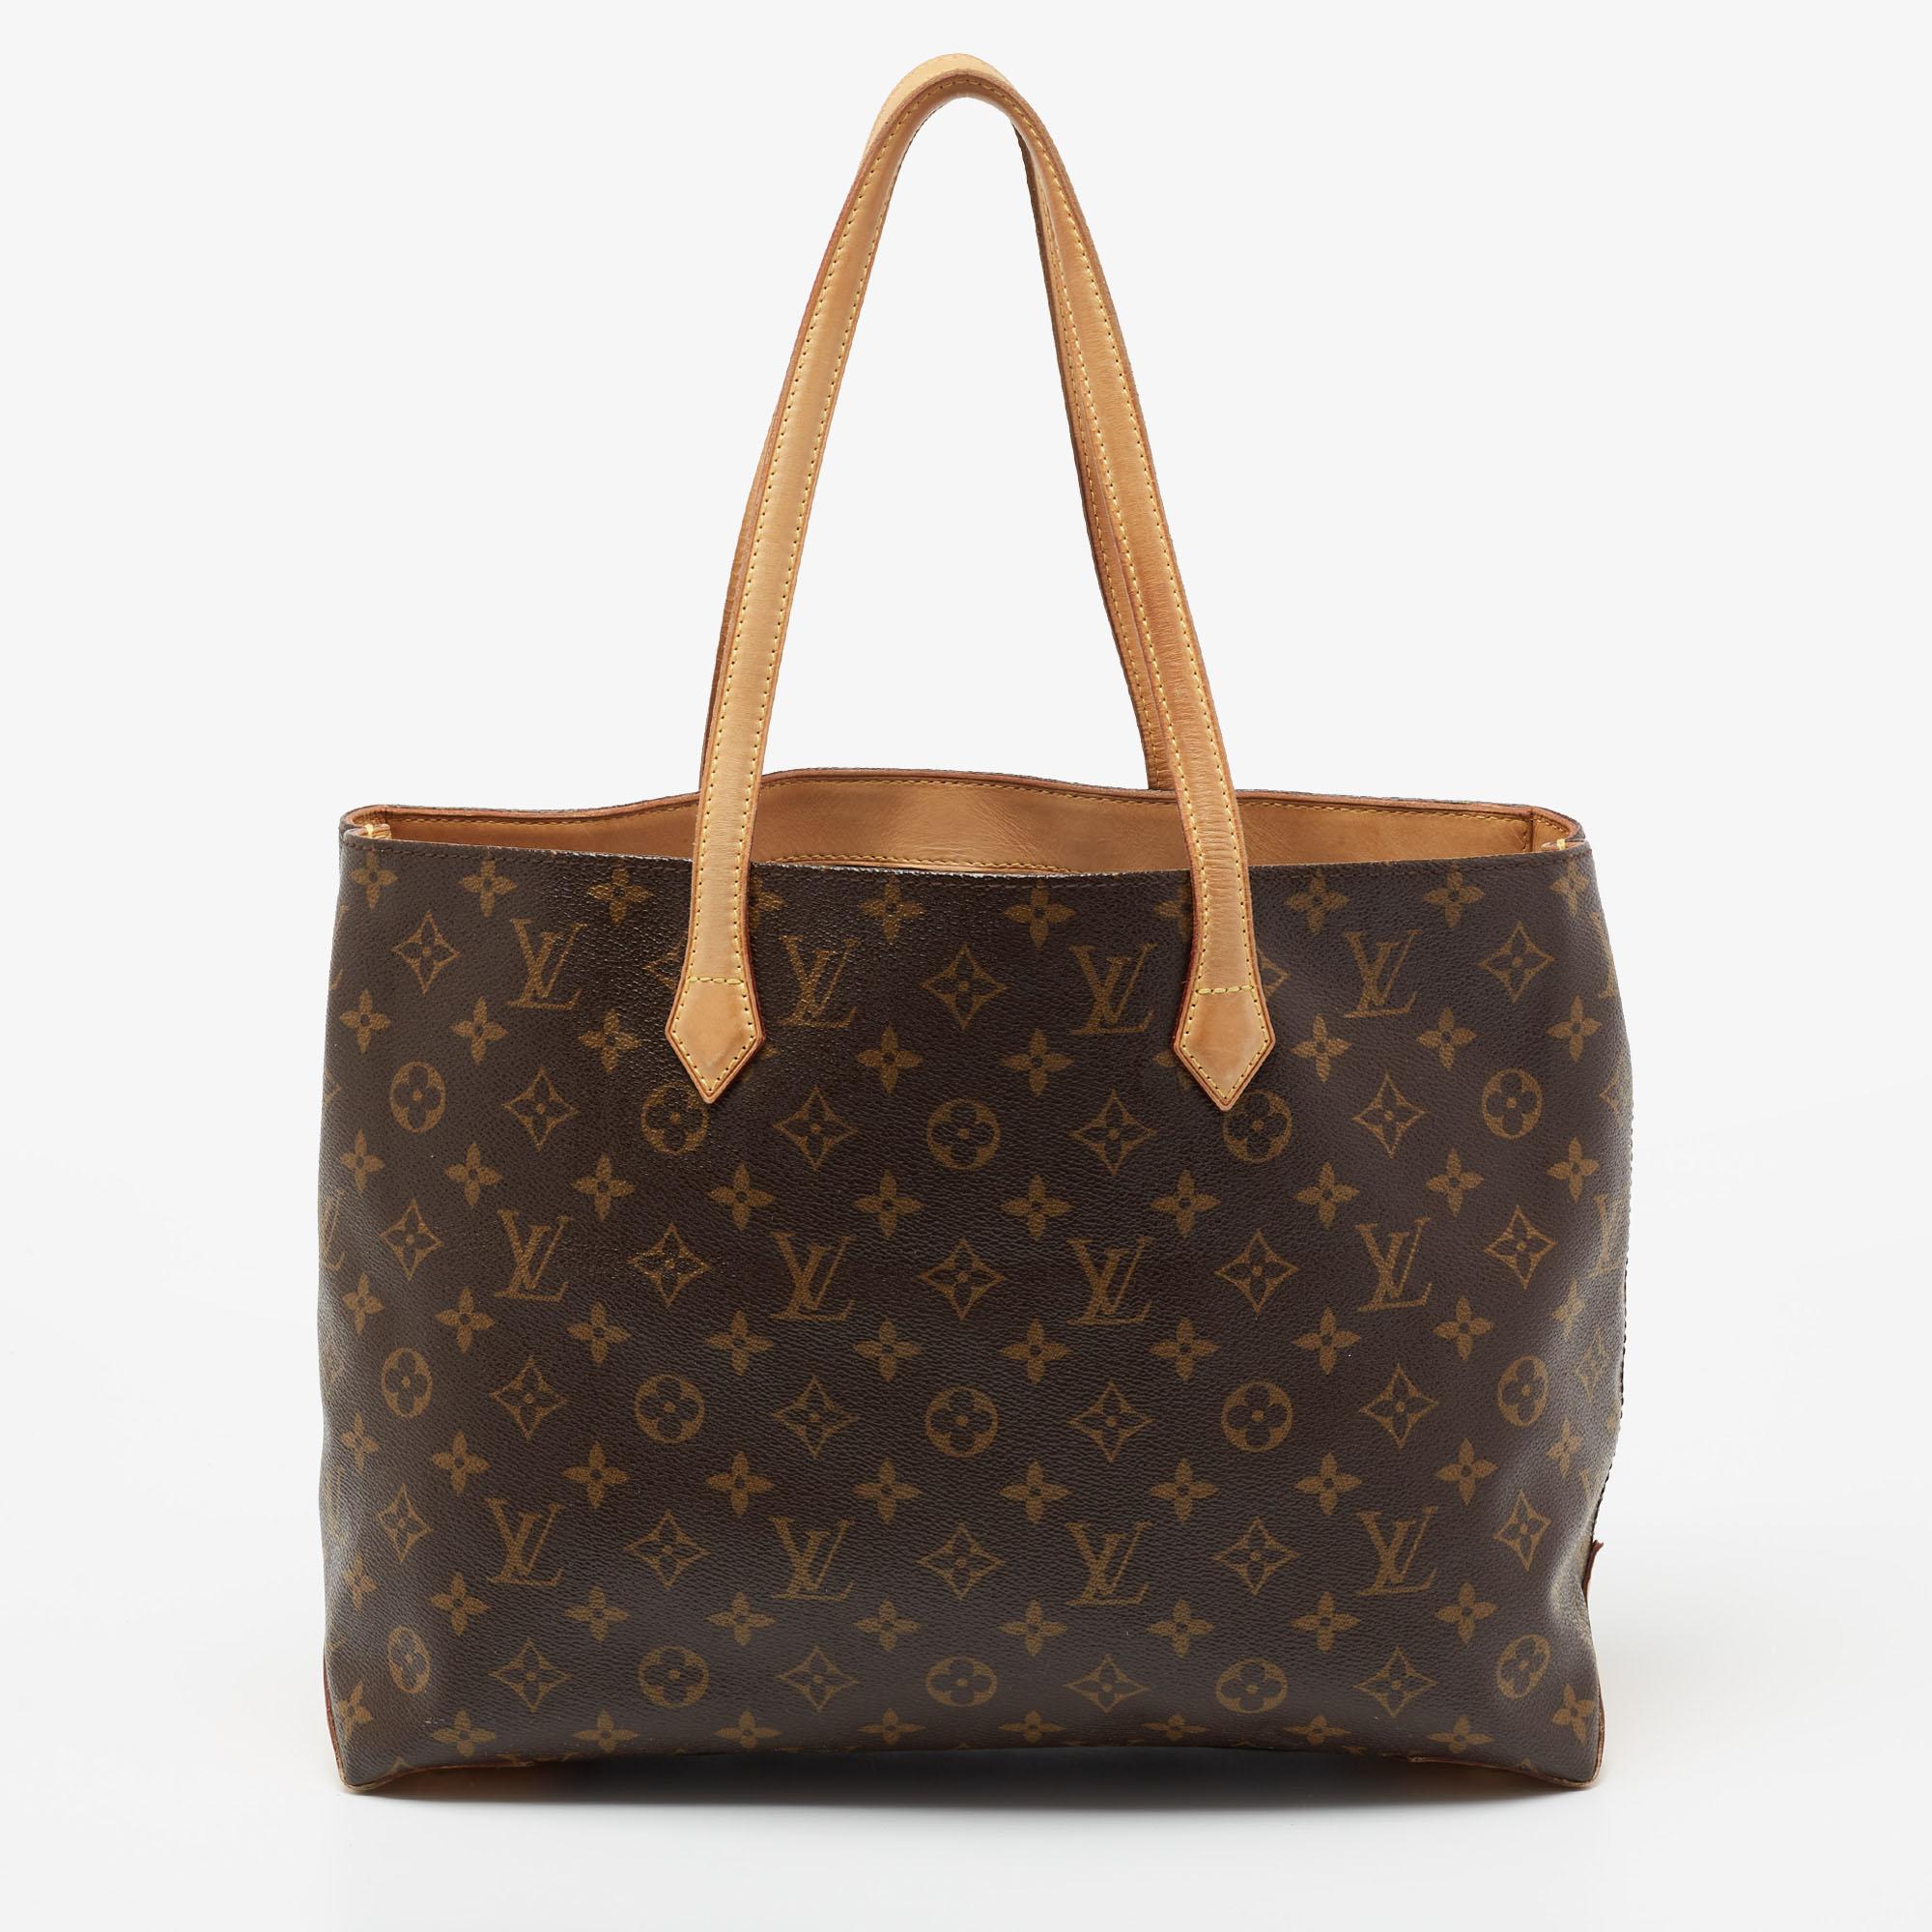 Louis Vuitton's handbags are popular owing to their high style and functionality. This Wilshire bag, like all the others from the brand, is durable and chic. Crafted from coated canvas, the brown bag comes with dual handles and opens to reveal a